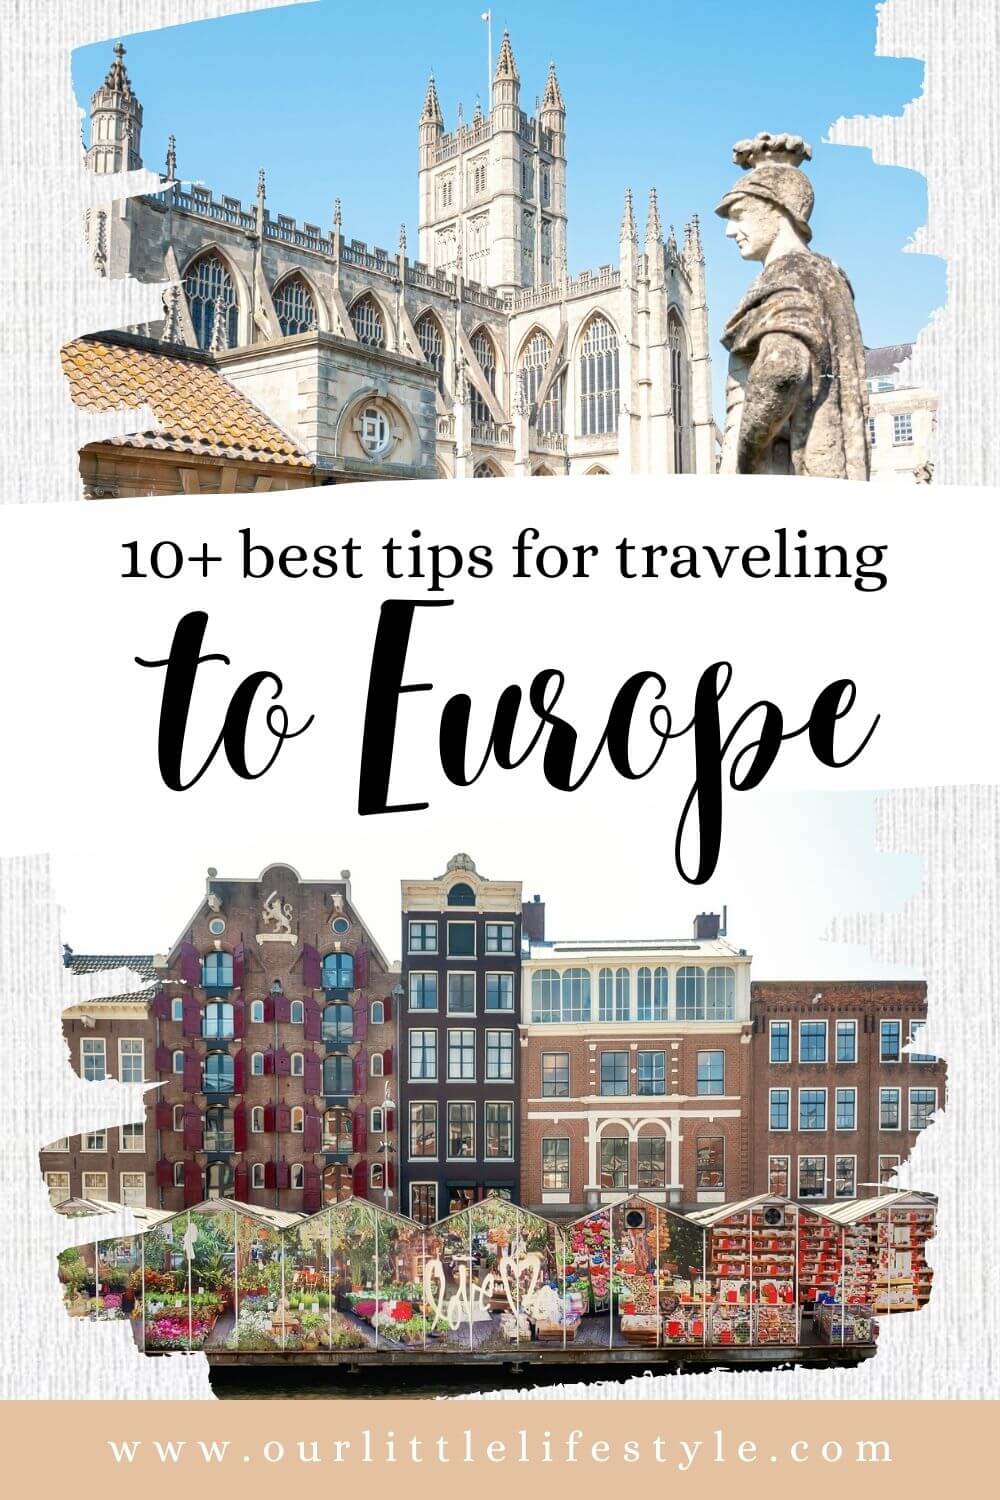 10 best tips for traveling to Europe this year